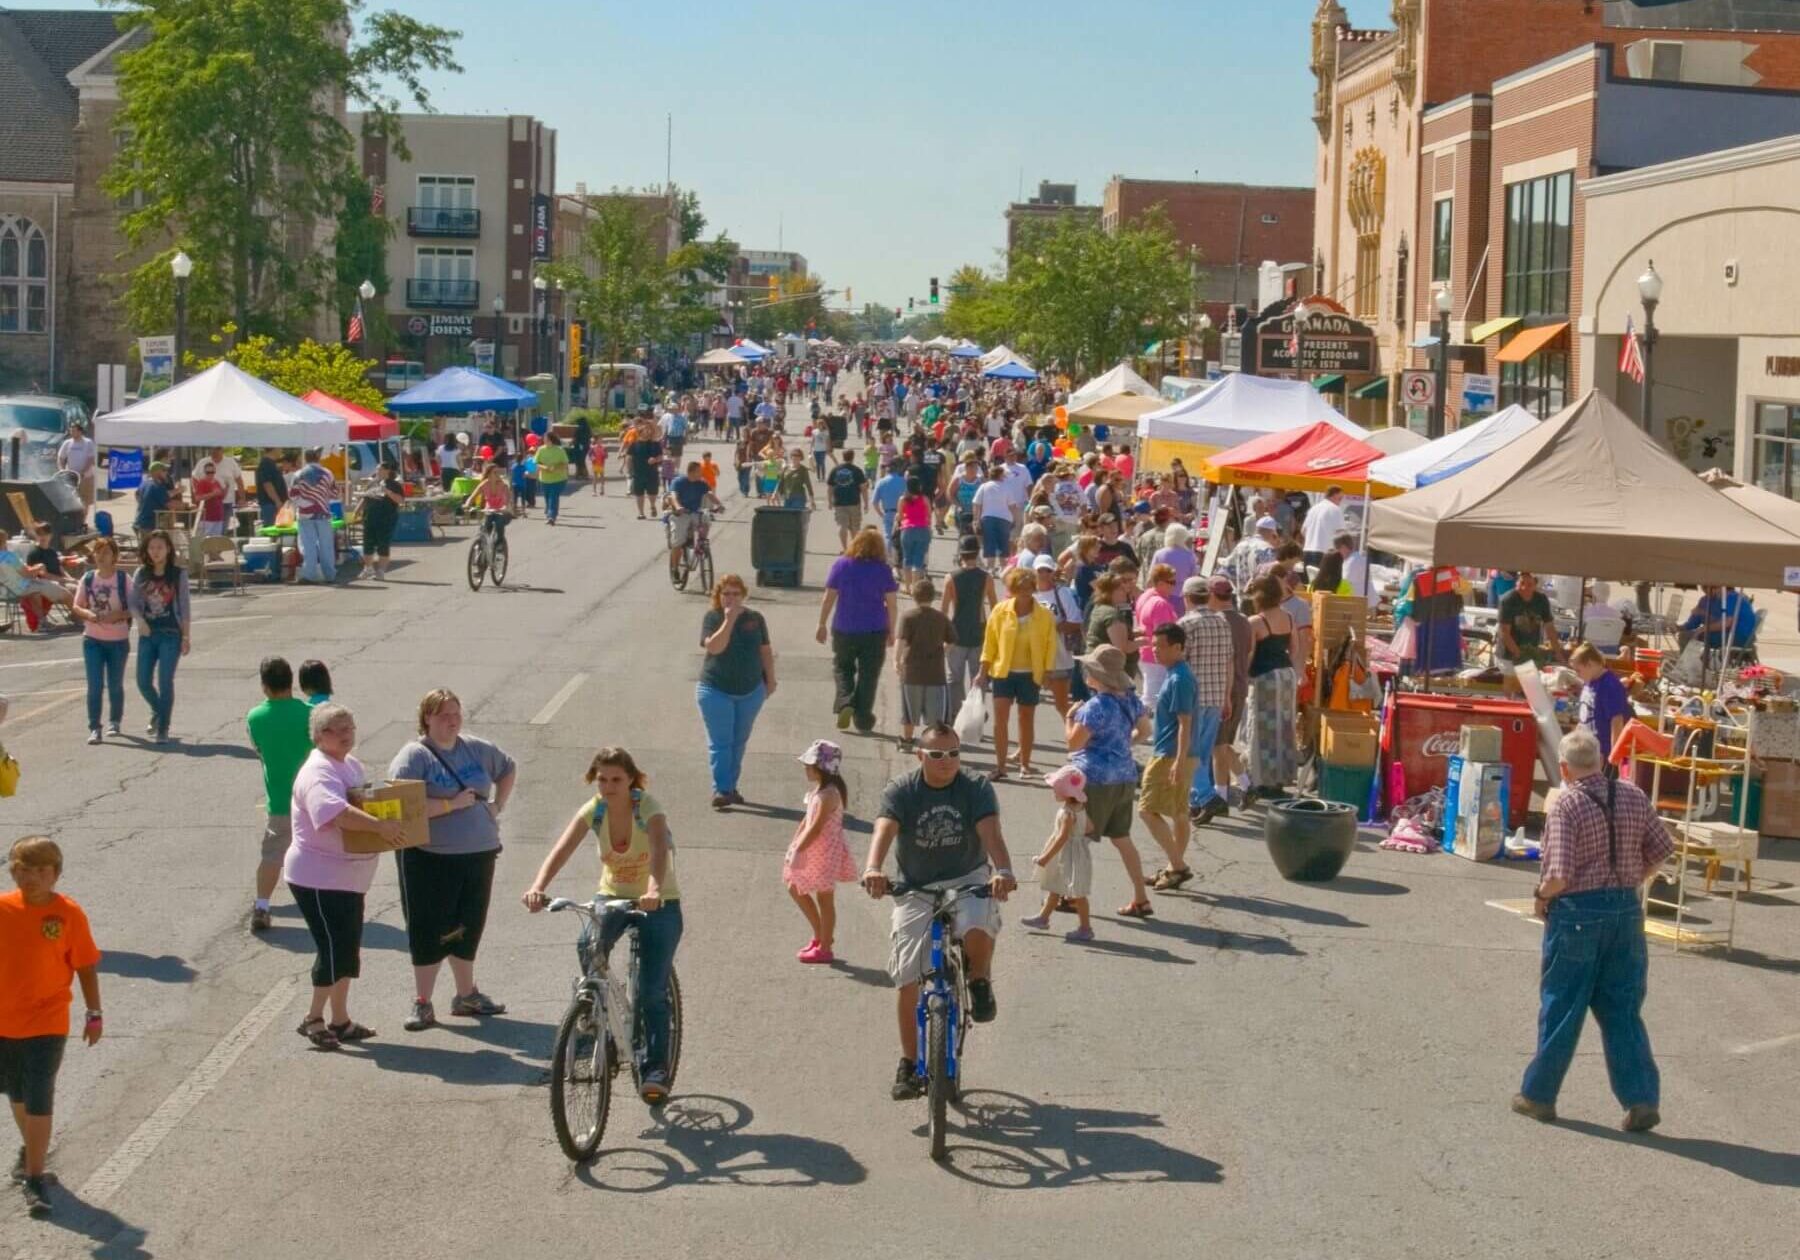 downtown emporia during the Great American Market event